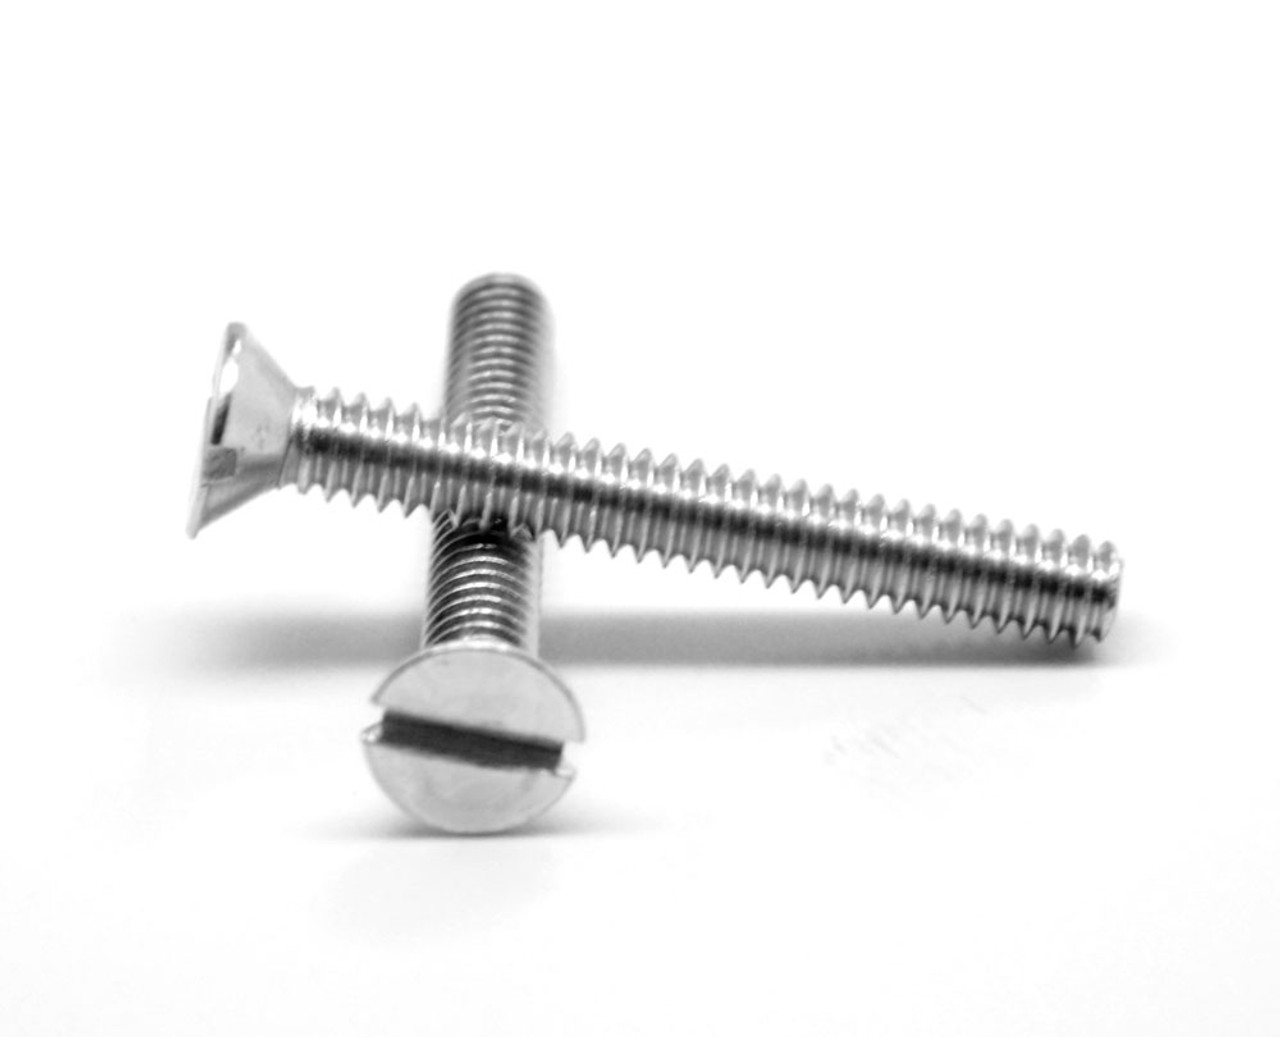 #0-80 x 3/16" (FT) Fine Thread Machine Screw Slotted Flat Head Stainless Steel 18-8